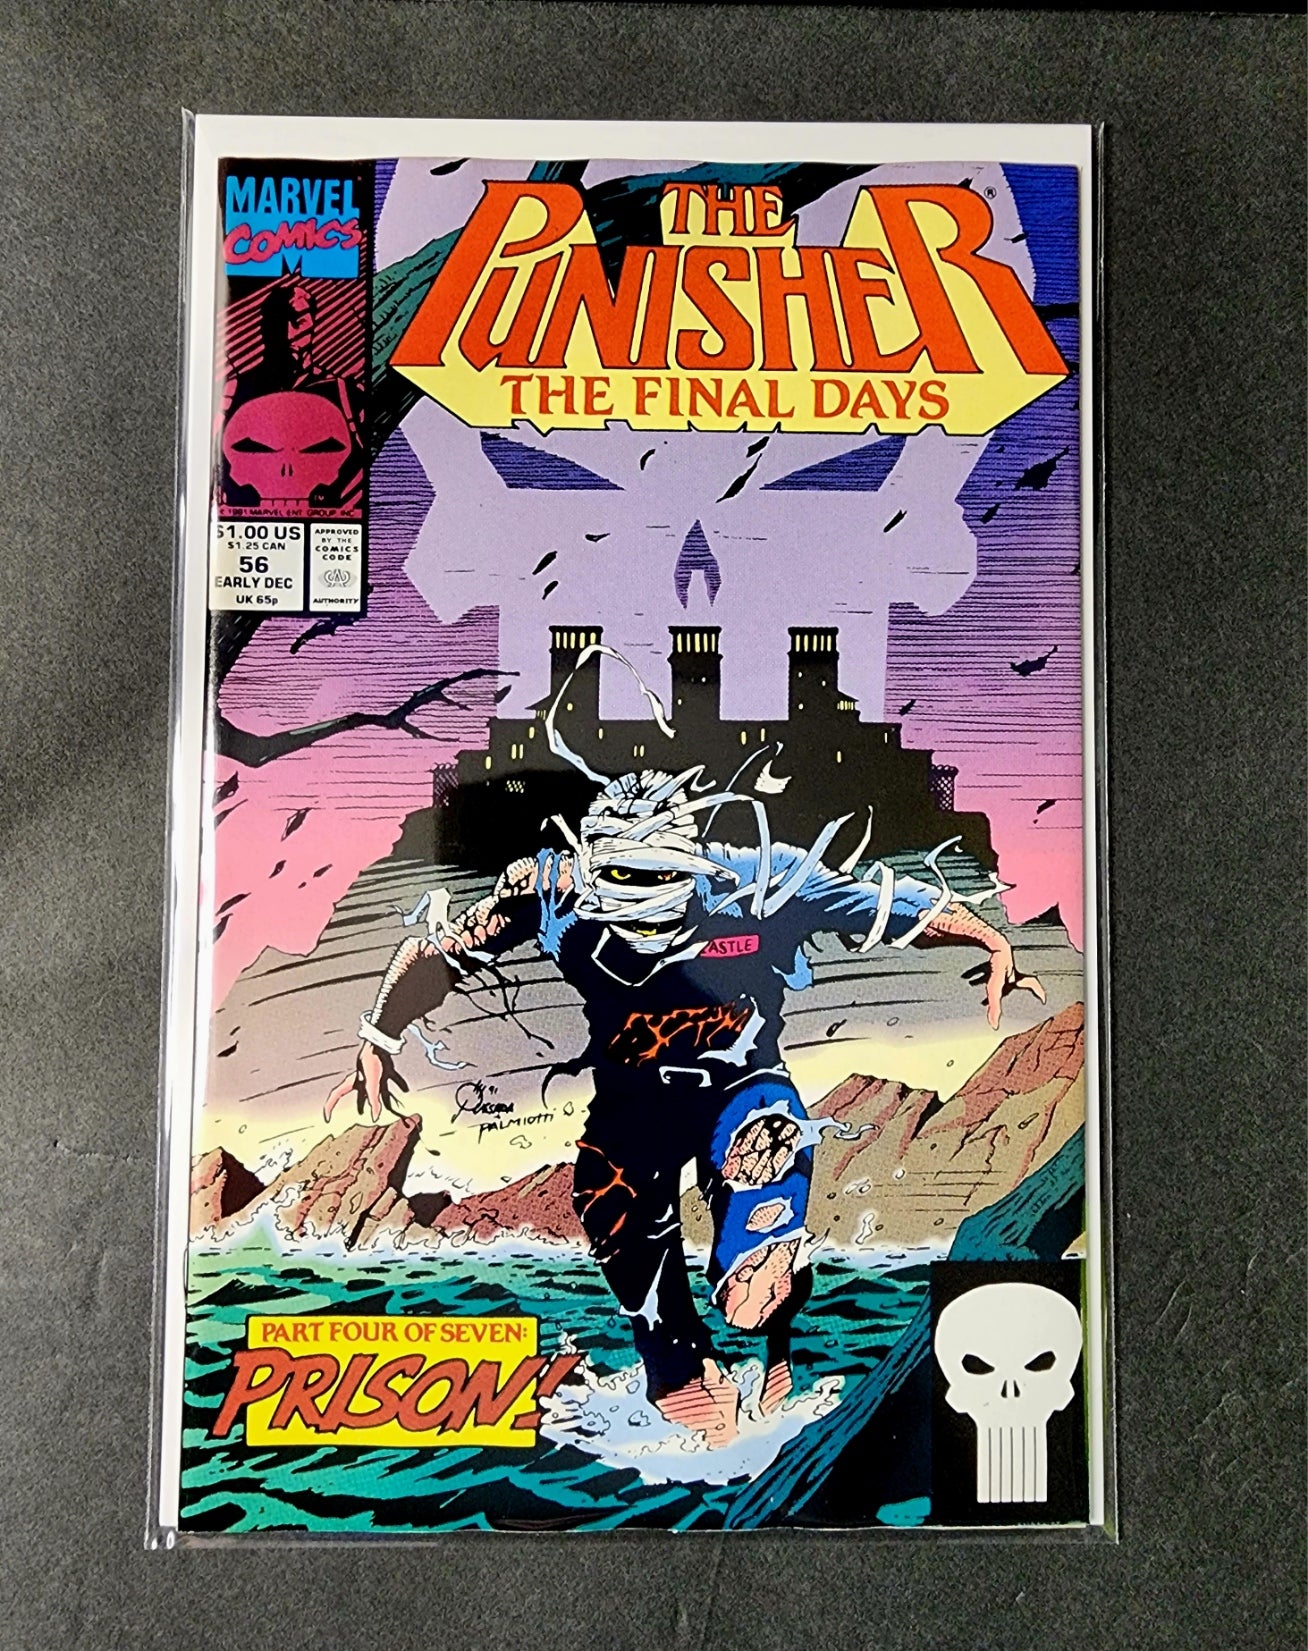 The Punisher #56 (VF/NM)